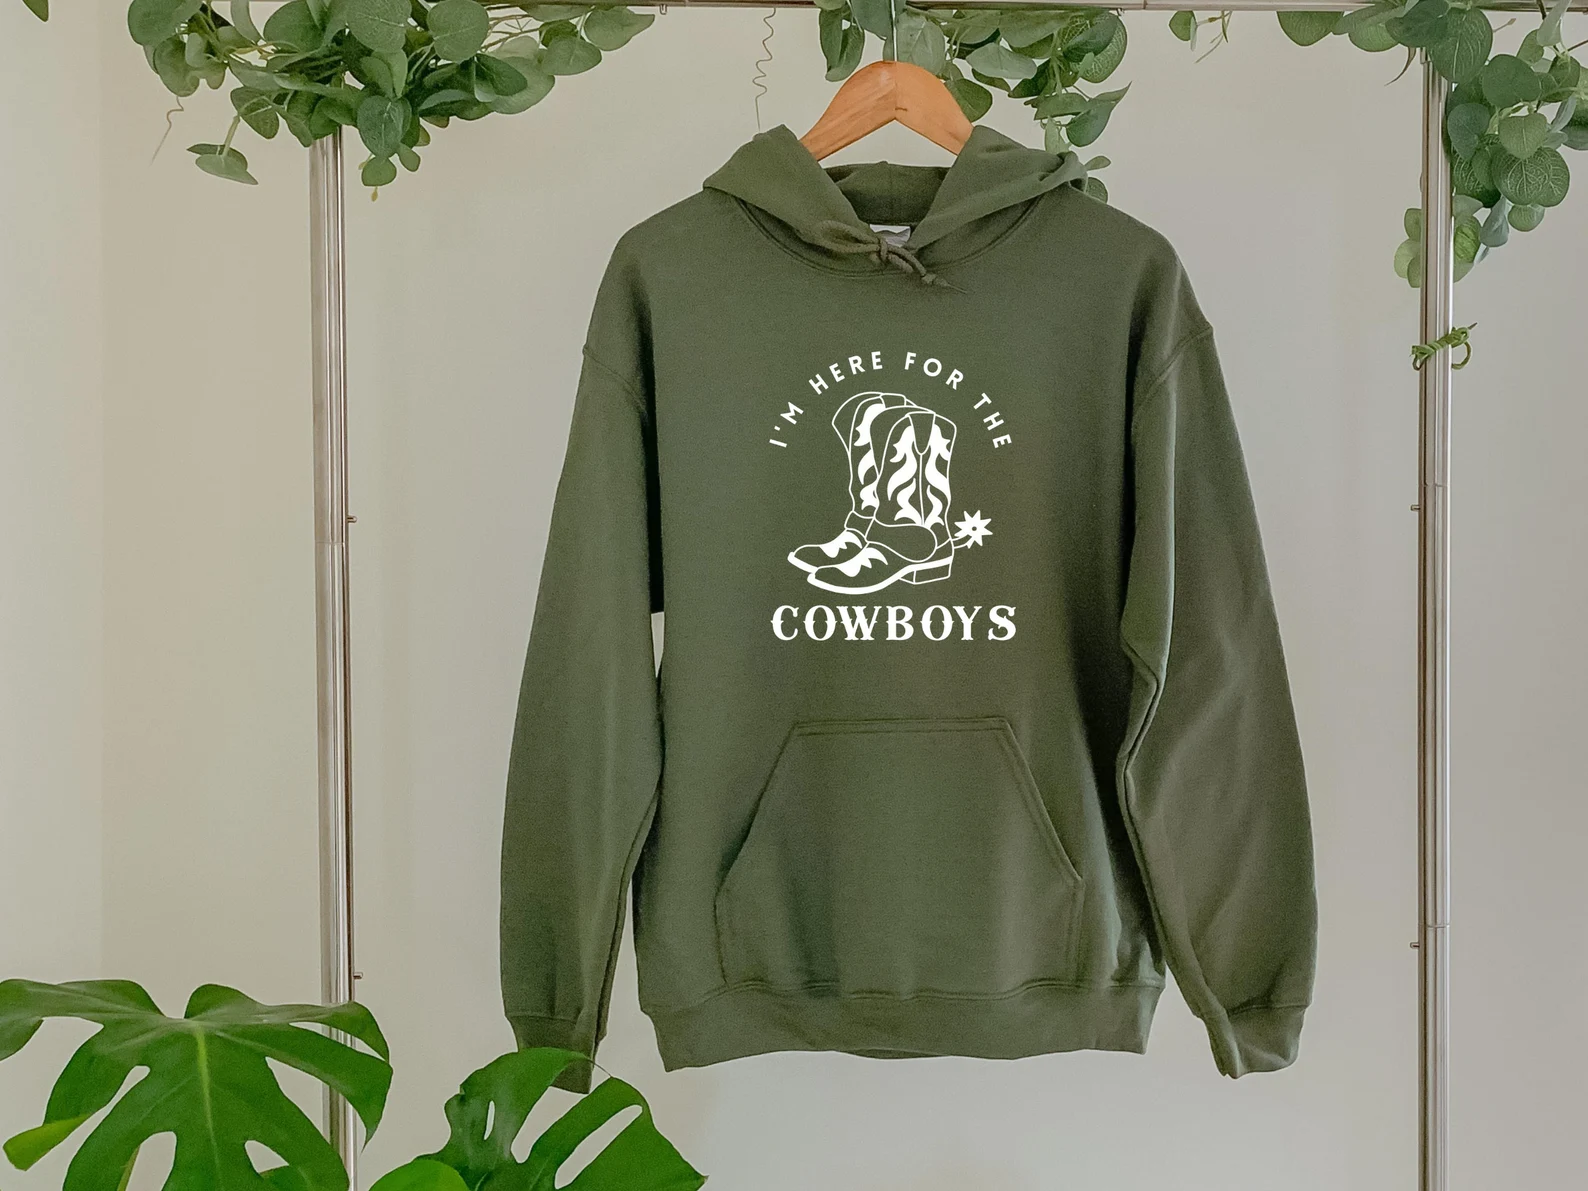 Olive warm sweater with a cowboys graphic.